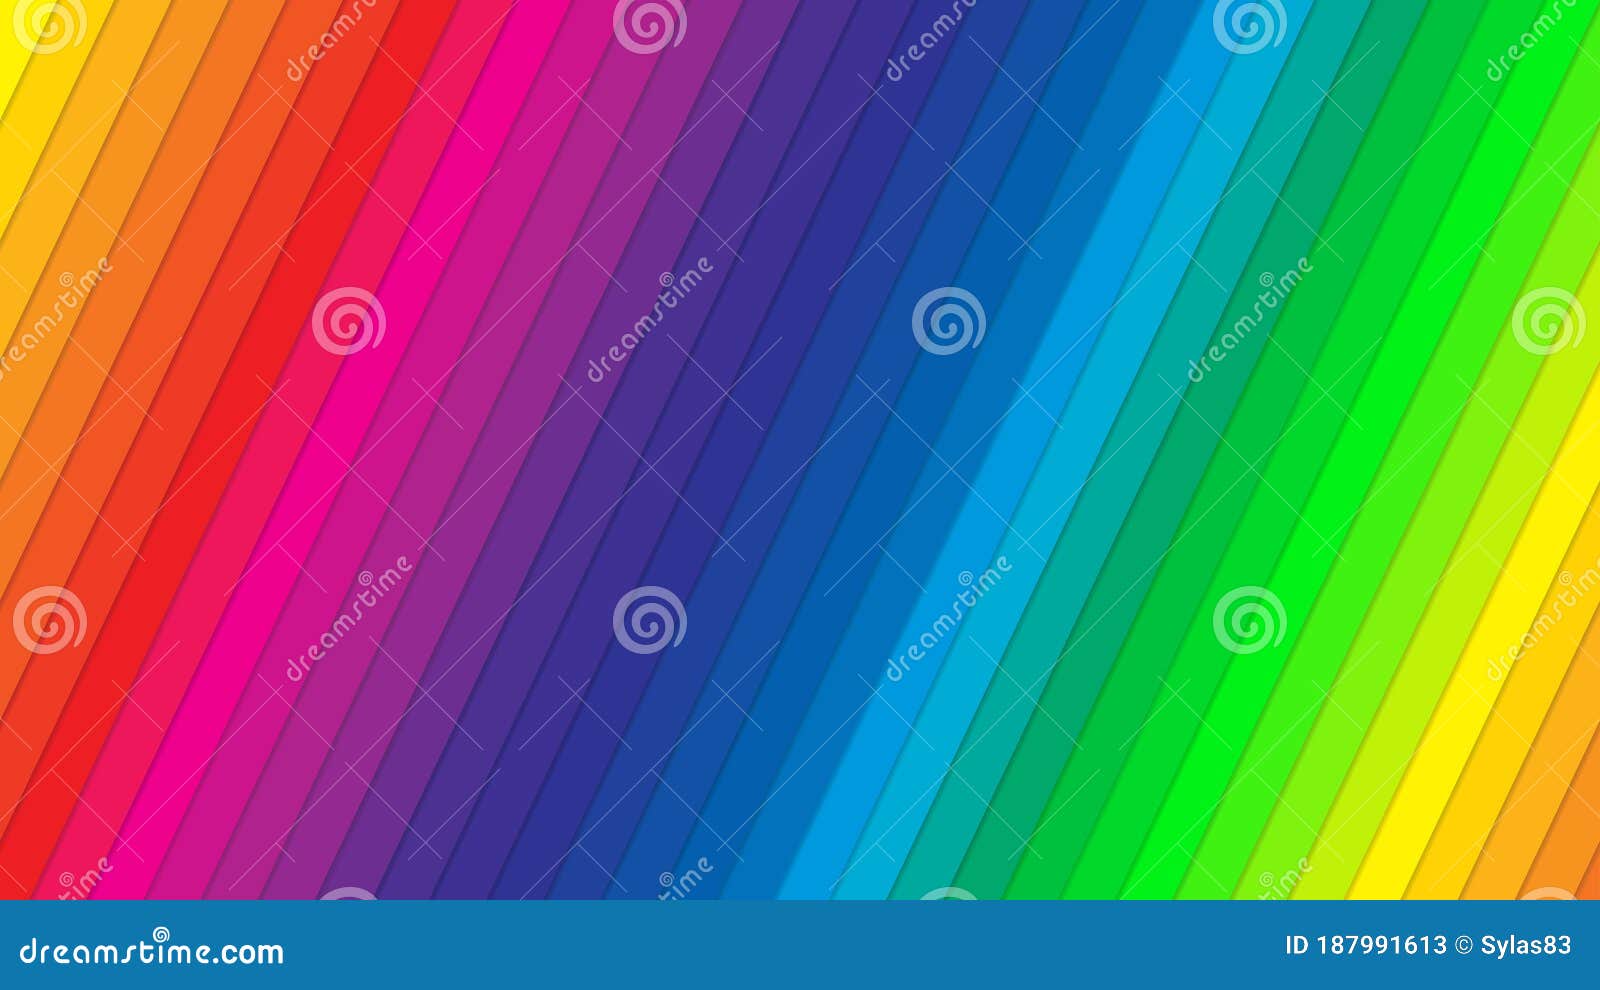 Beautiful Color Spectrum Background. Linear Color Spectrum Wallpaper with  Light Shadows. Very High Quality Stock Vector - Illustration of design,  graphic: 187991613